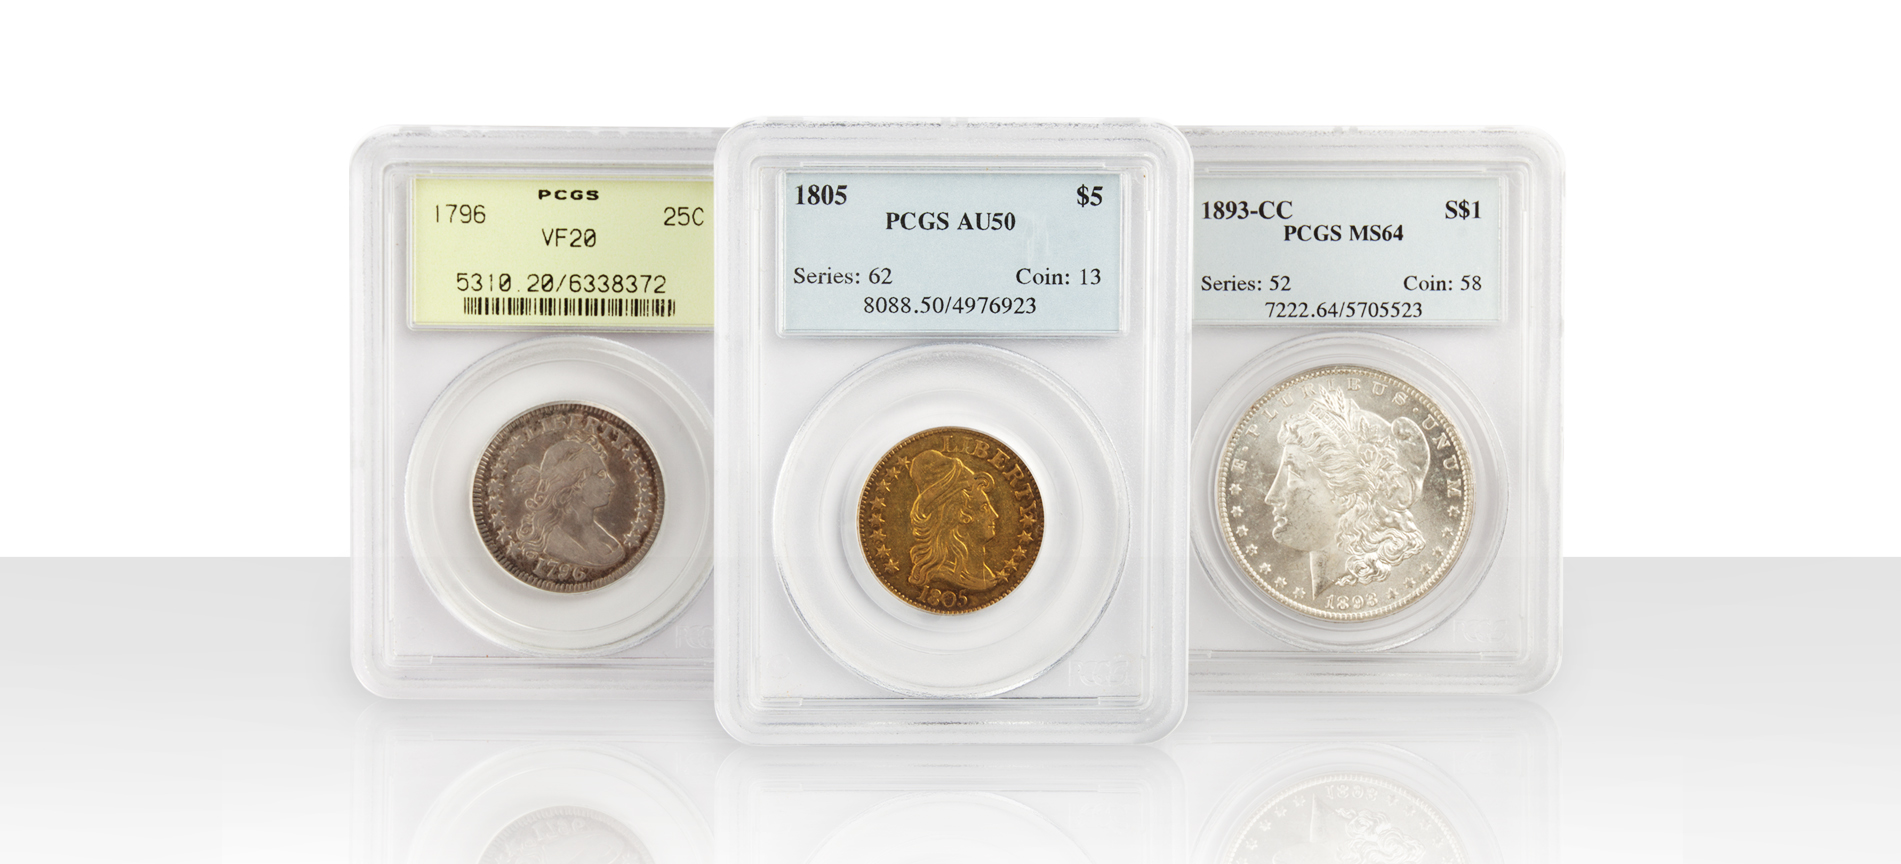 February 12, 2015 Coin Auction